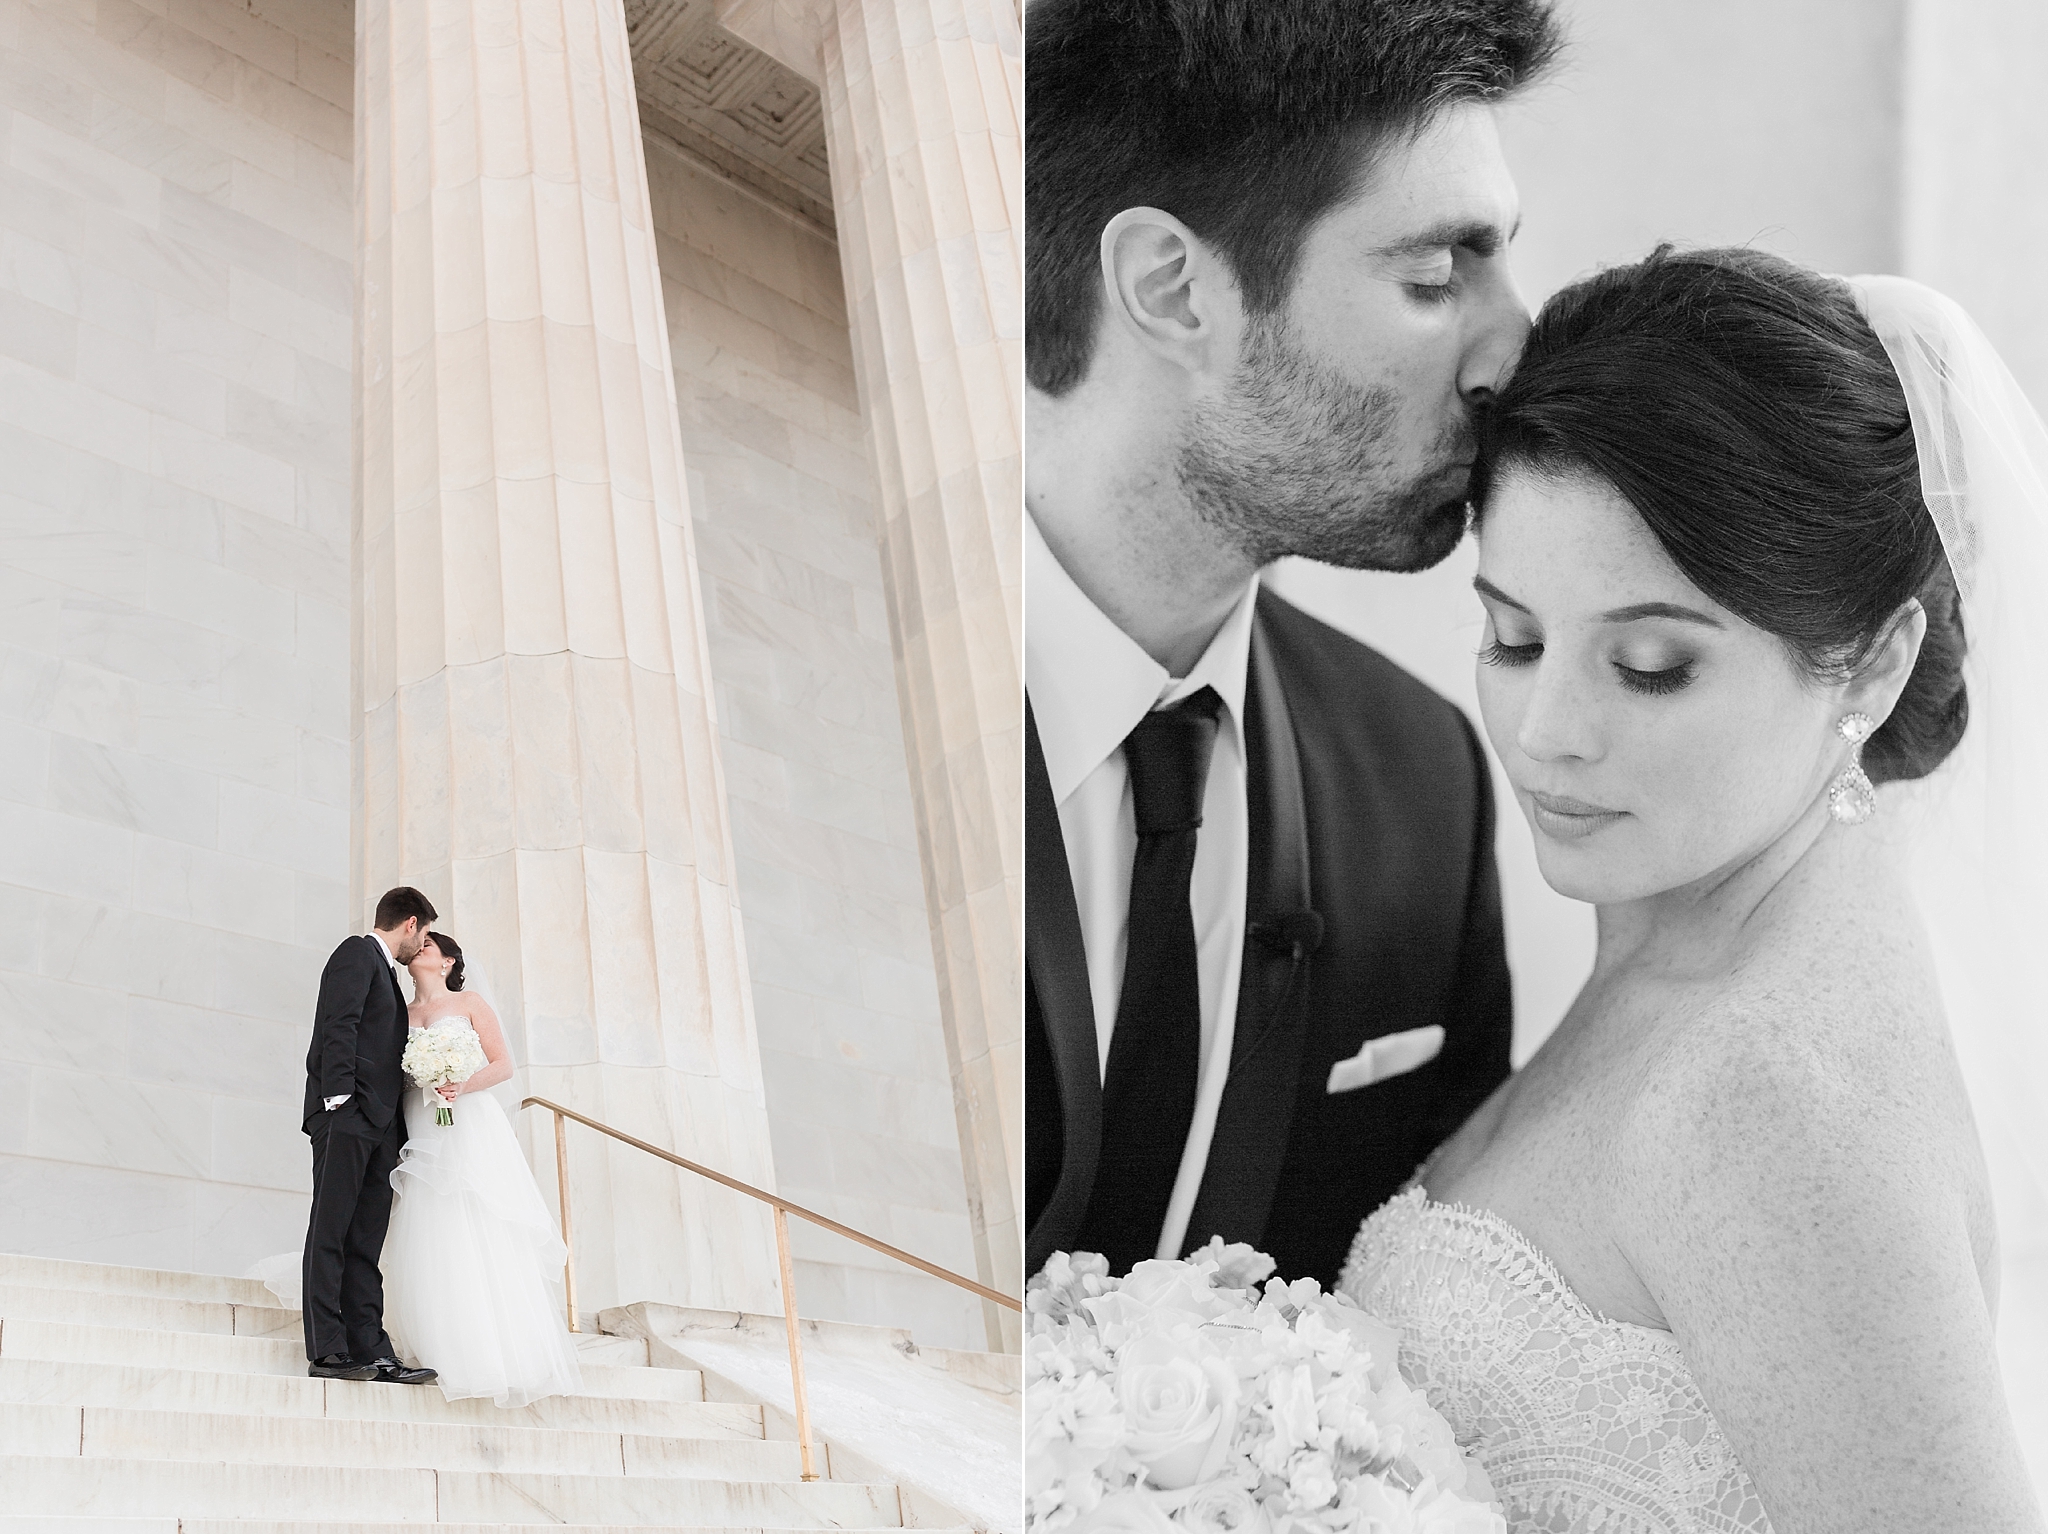 Washington, DC wedding and anniversary photographer, Alicia Lacey, takes a look back on the best couples portraits of the 2016 season.